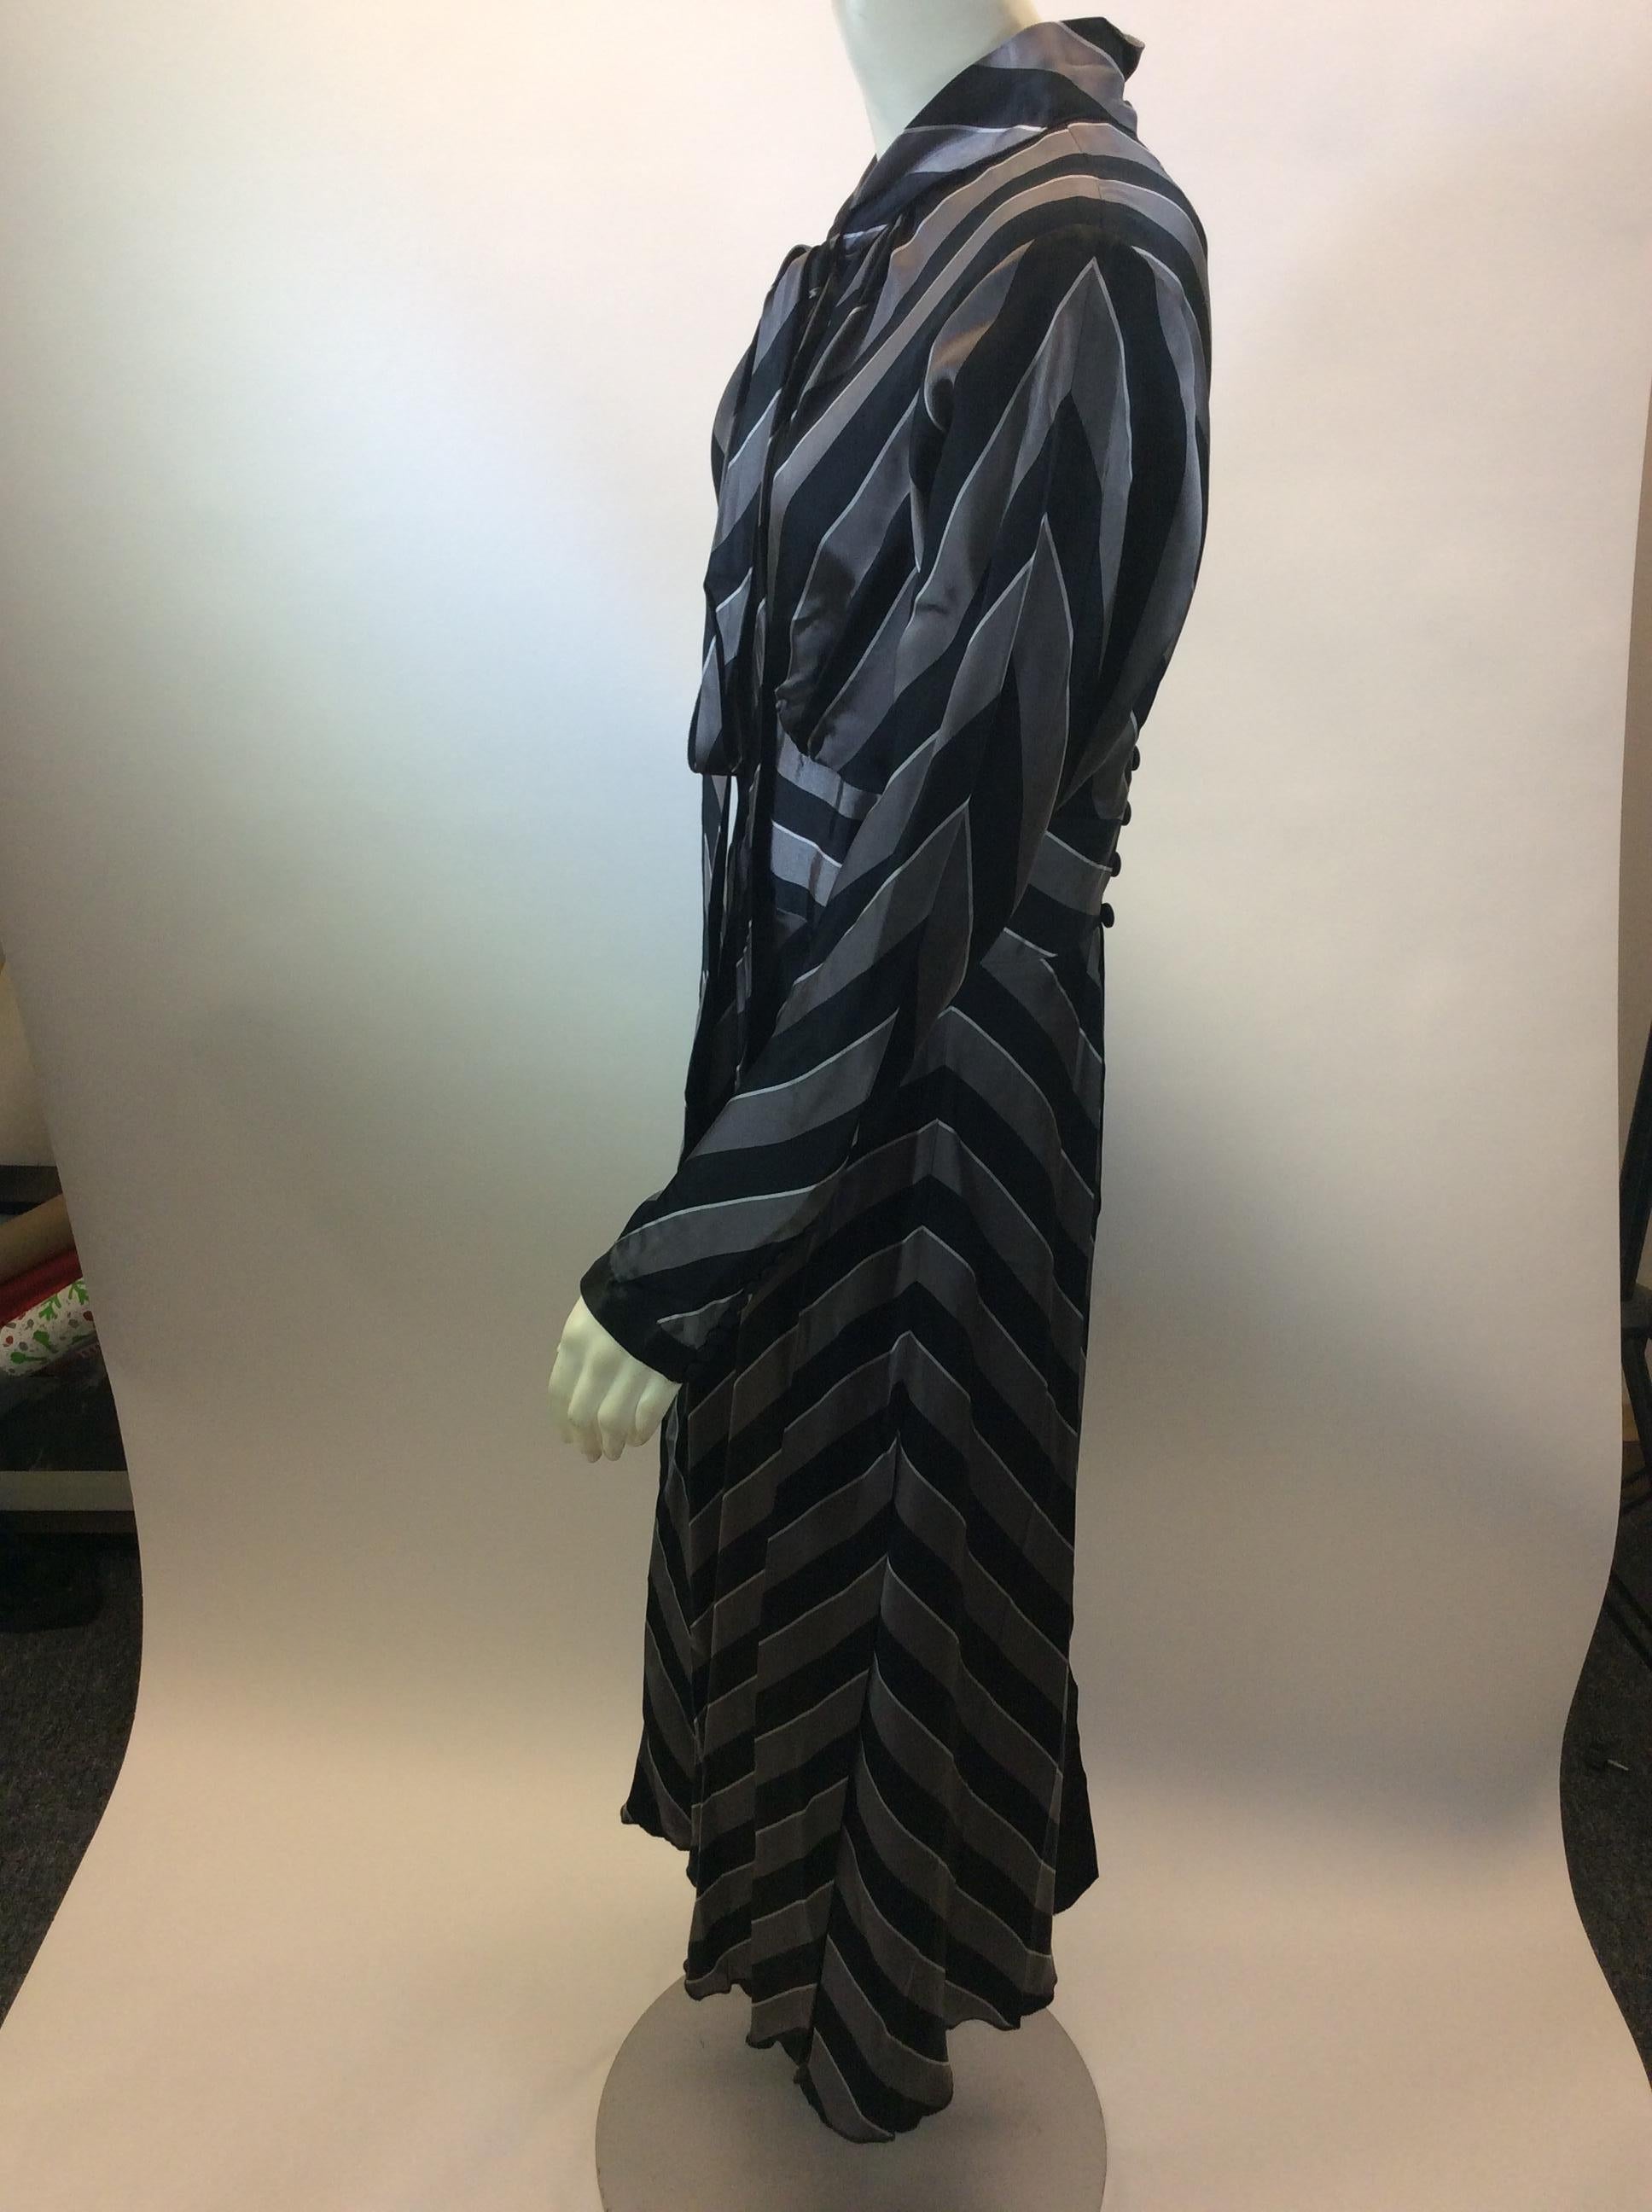 Marc Jacobs Black and Grey Stripe Dress NWT
$550
Made in the US
100% Rayon
Size 6
Length 47